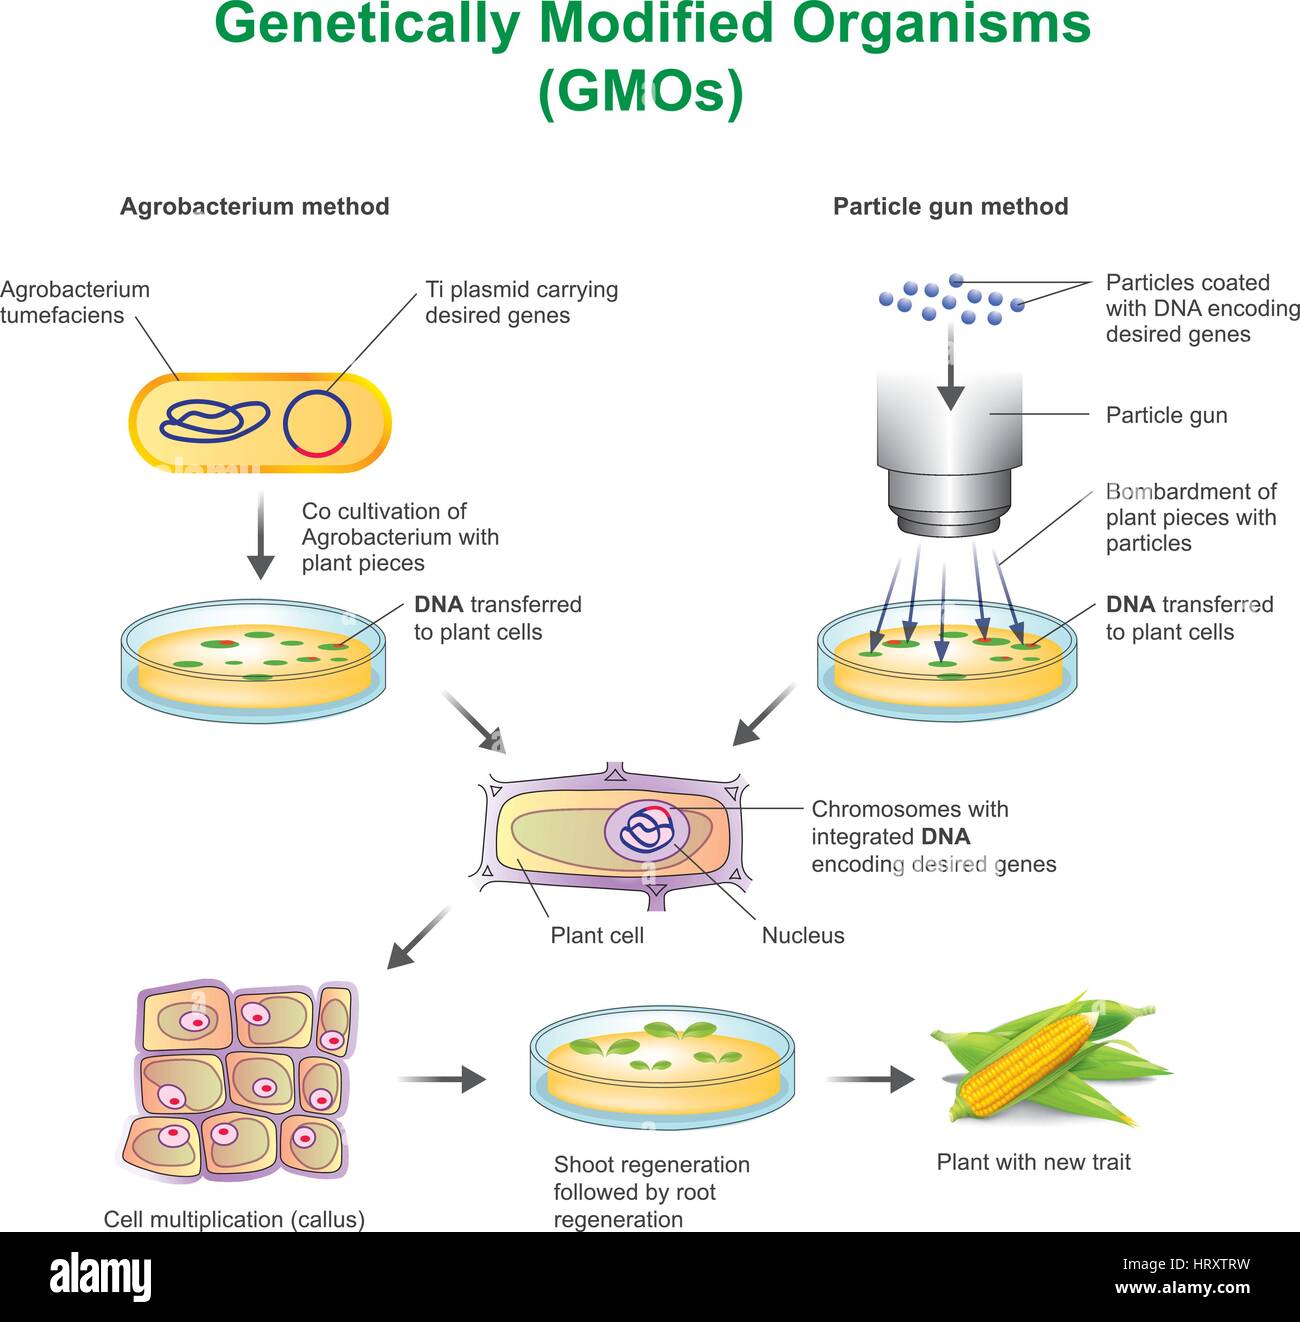 A genetically modified organism (GMO) is an organism or microorganism whose genetic material has been altered to contain a segment of DNA from another Stock Vector